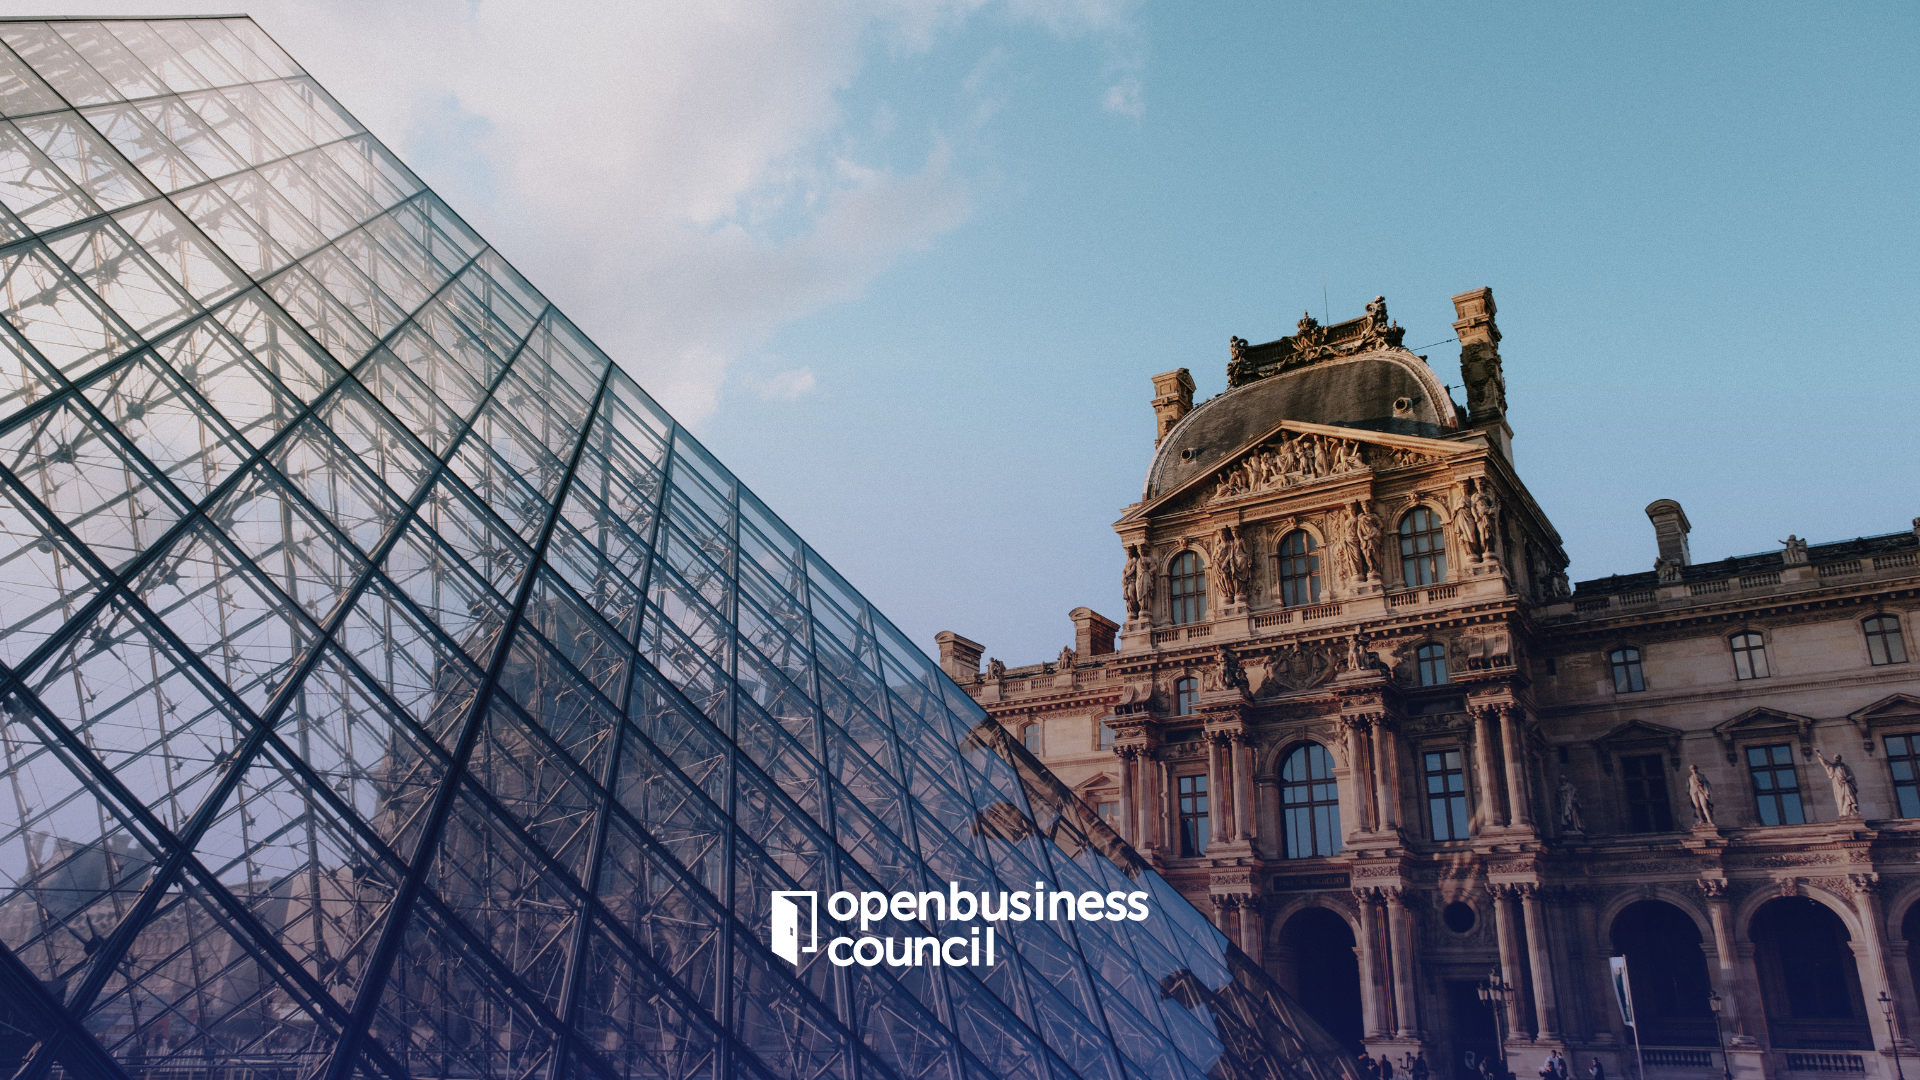 Paris Blockchain Week Returns And Turns The Louvre Into Palace of Web3